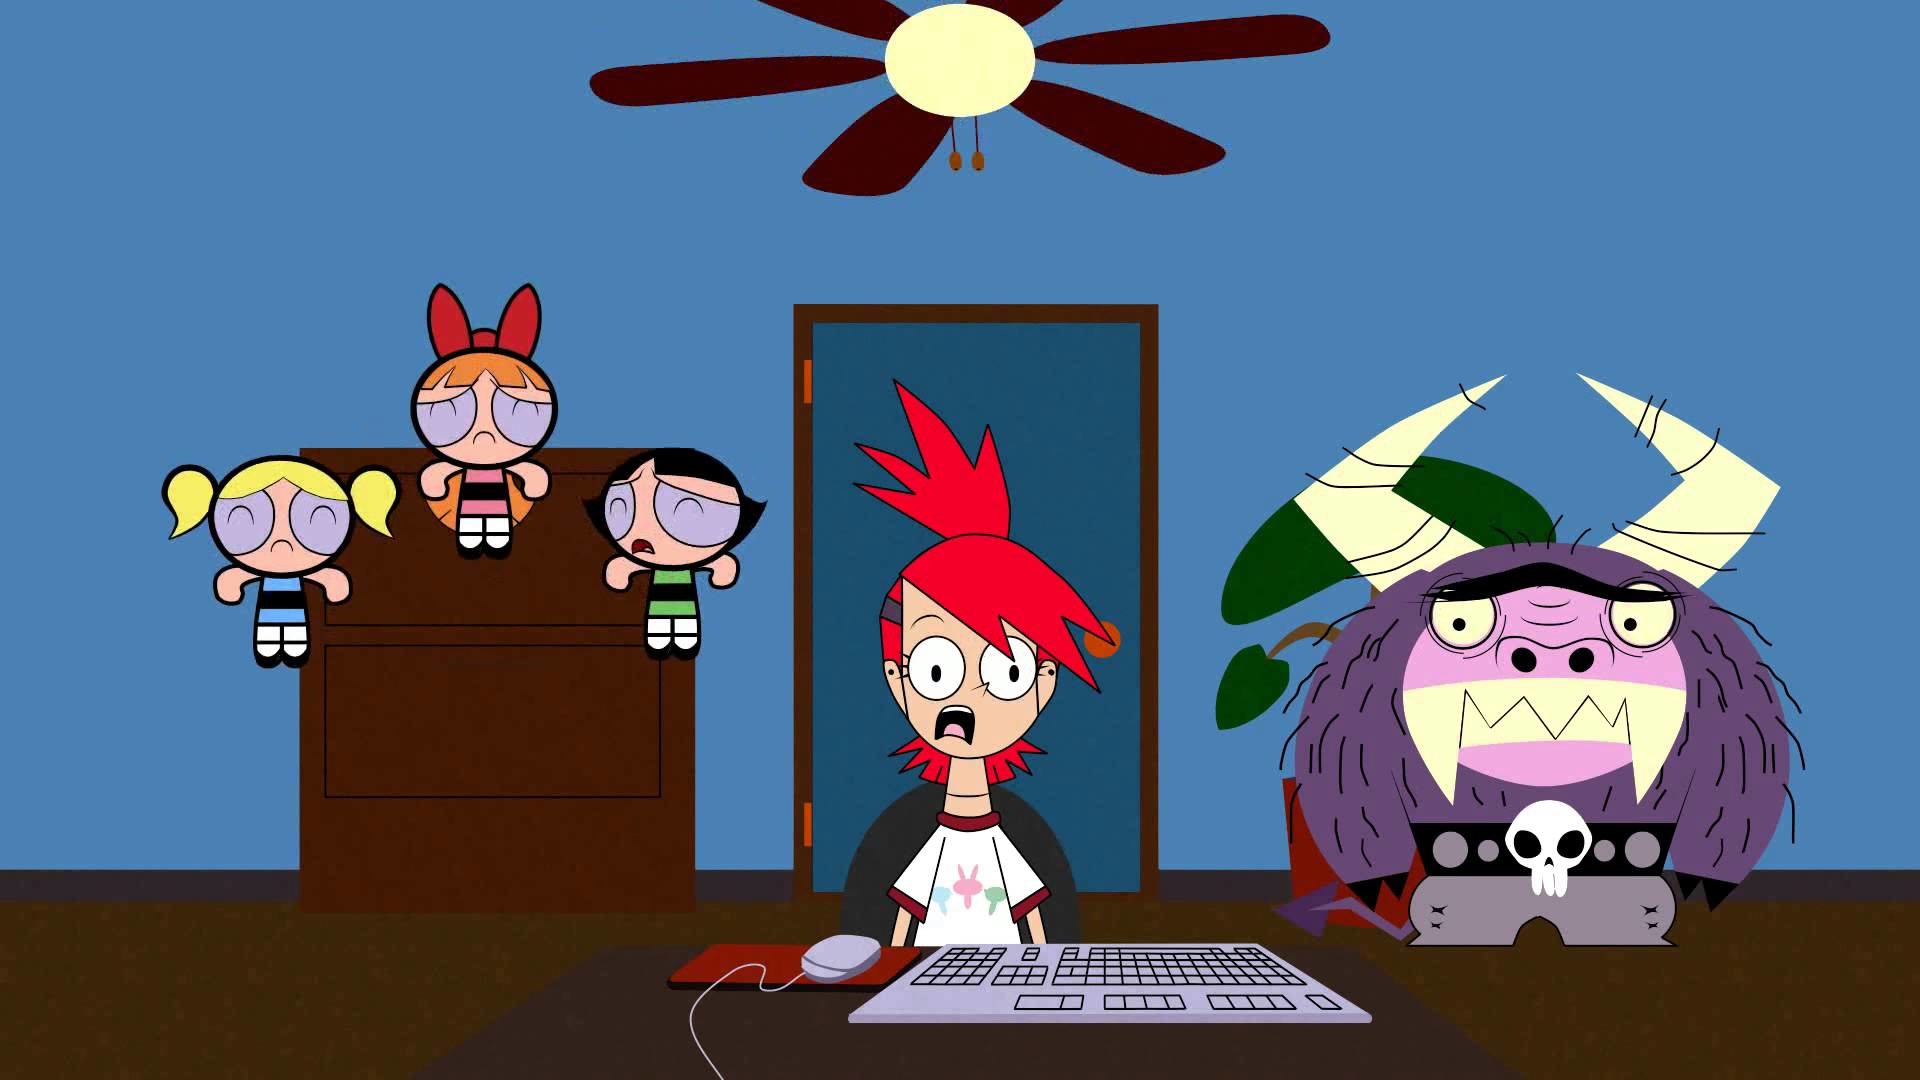 Rule 34 house. Дом друзей Фостера Rule 34. Fosters Home for Imaginary friends Фрэнки. Фрэнки Фостер 34.